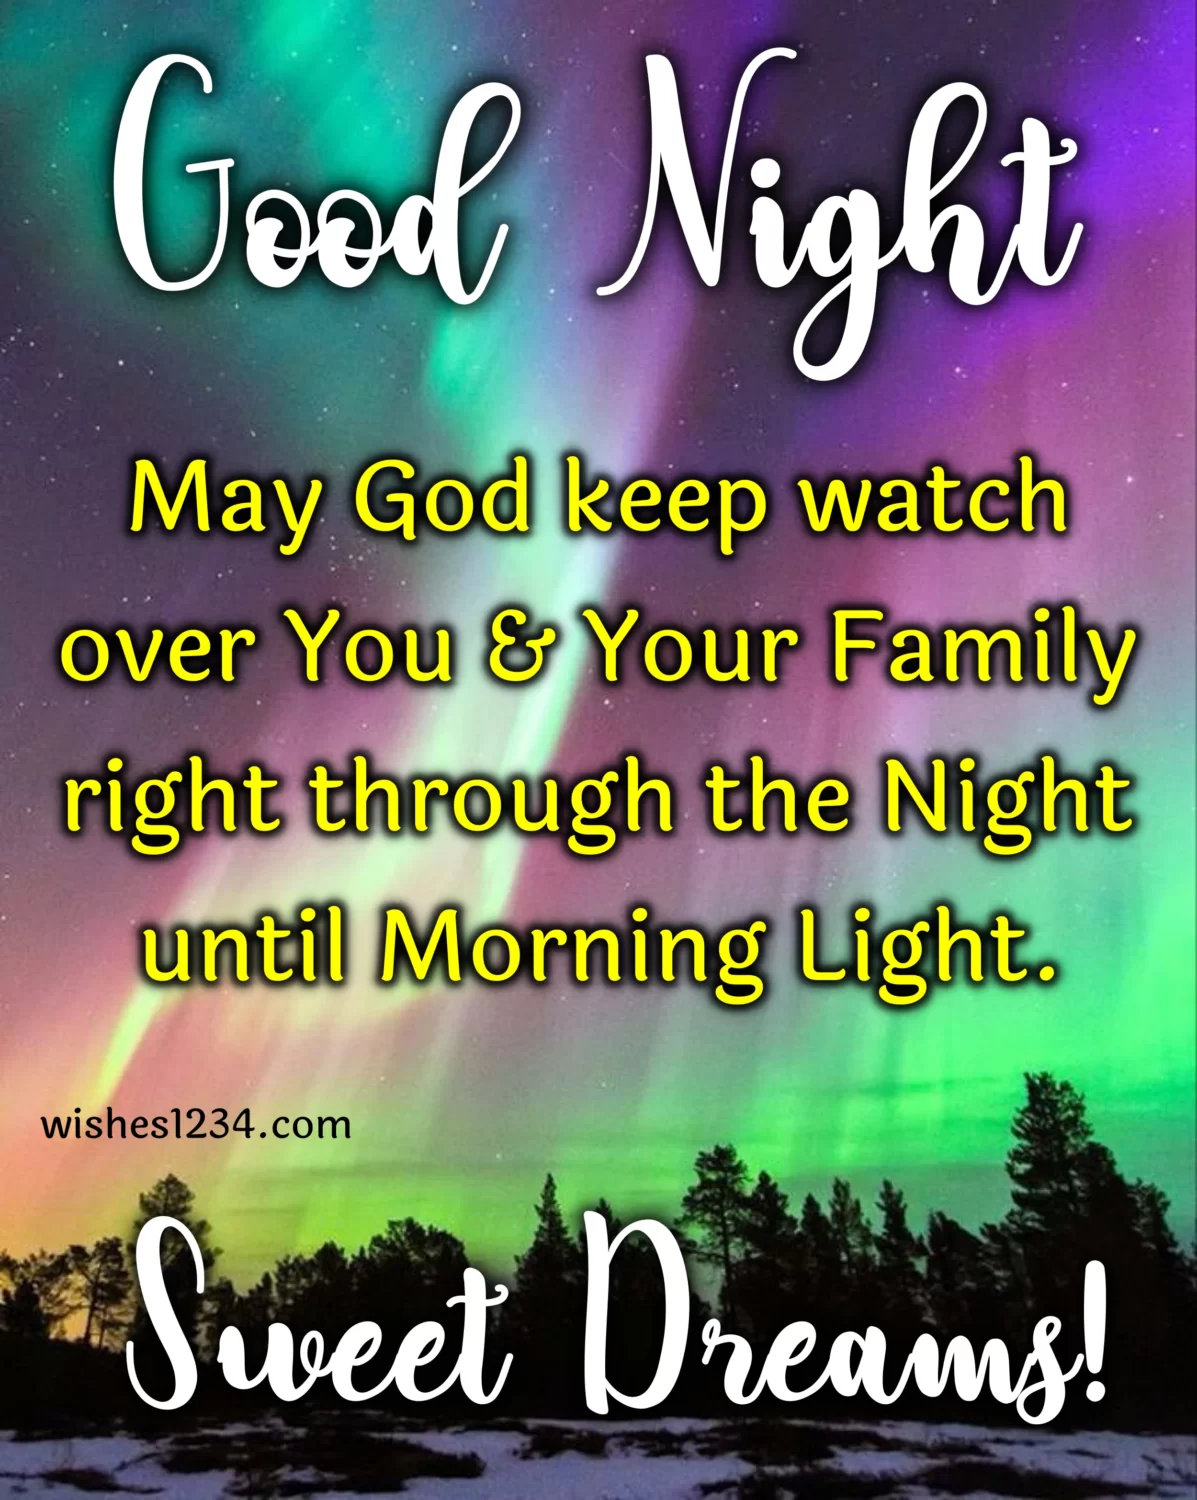 Good night message with northern light background, Good Night Quotes.